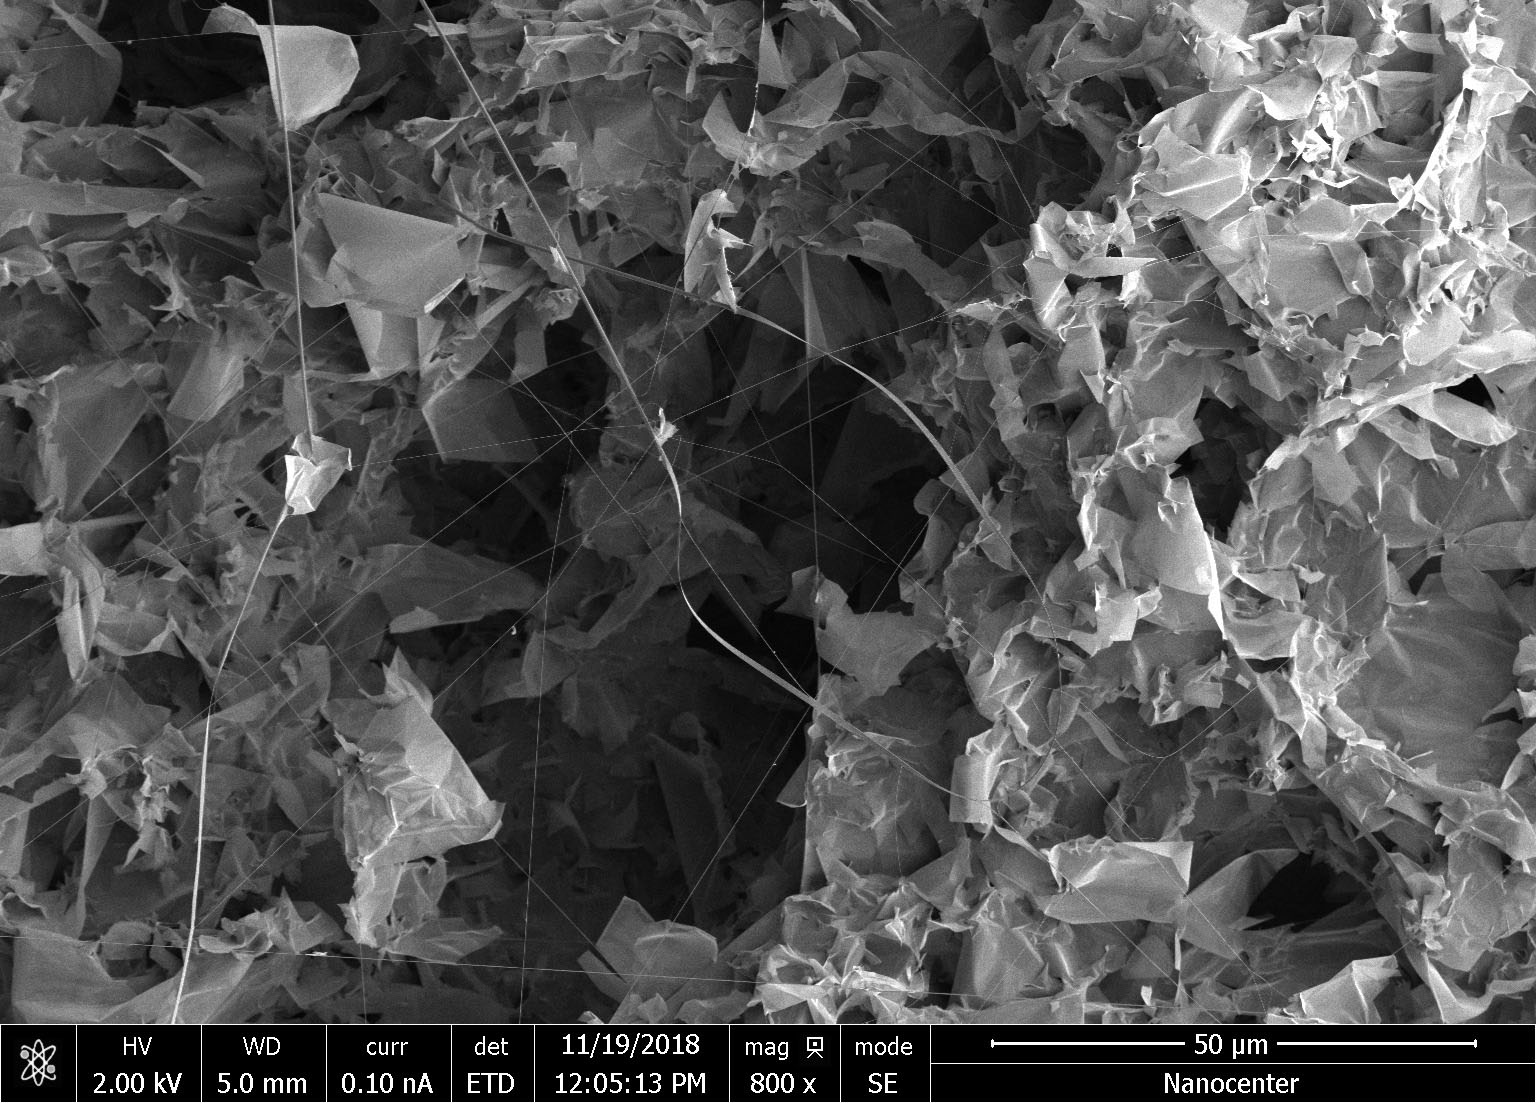 Electron microscope image of as-grown MoS2 nanomaterial, with flakes, ribbons, and nanotubes